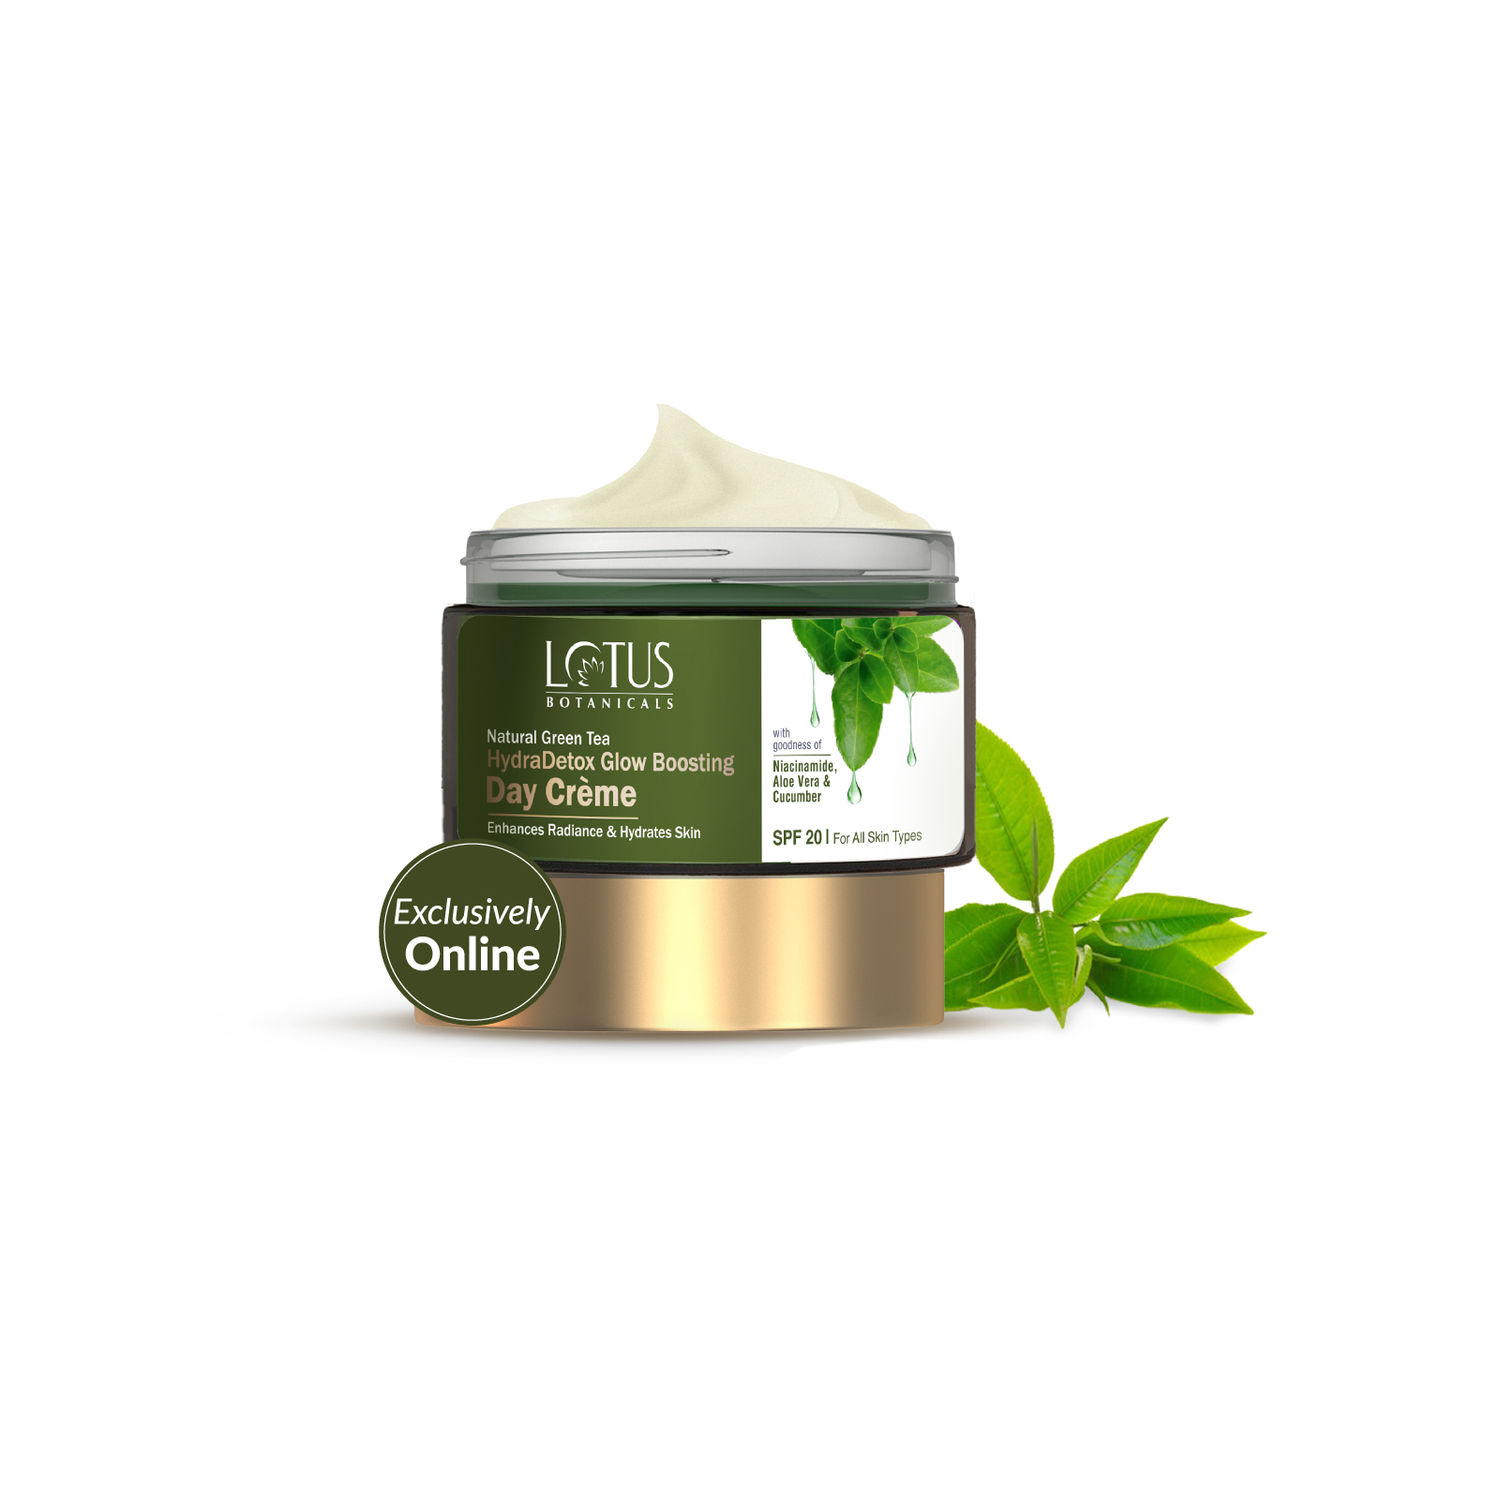 Buy Lotus Botanicals Natural Green Tea HydraDetox Glow Boosting Day Cream SPF 20 with Niacinamide | Boosts Glow and Enhances Skin Radiance | Hydrates Skin | Protects from Sun | Prevents Acne and Pimples | Preservative Free | For All Skin Types | 50g - Purplle